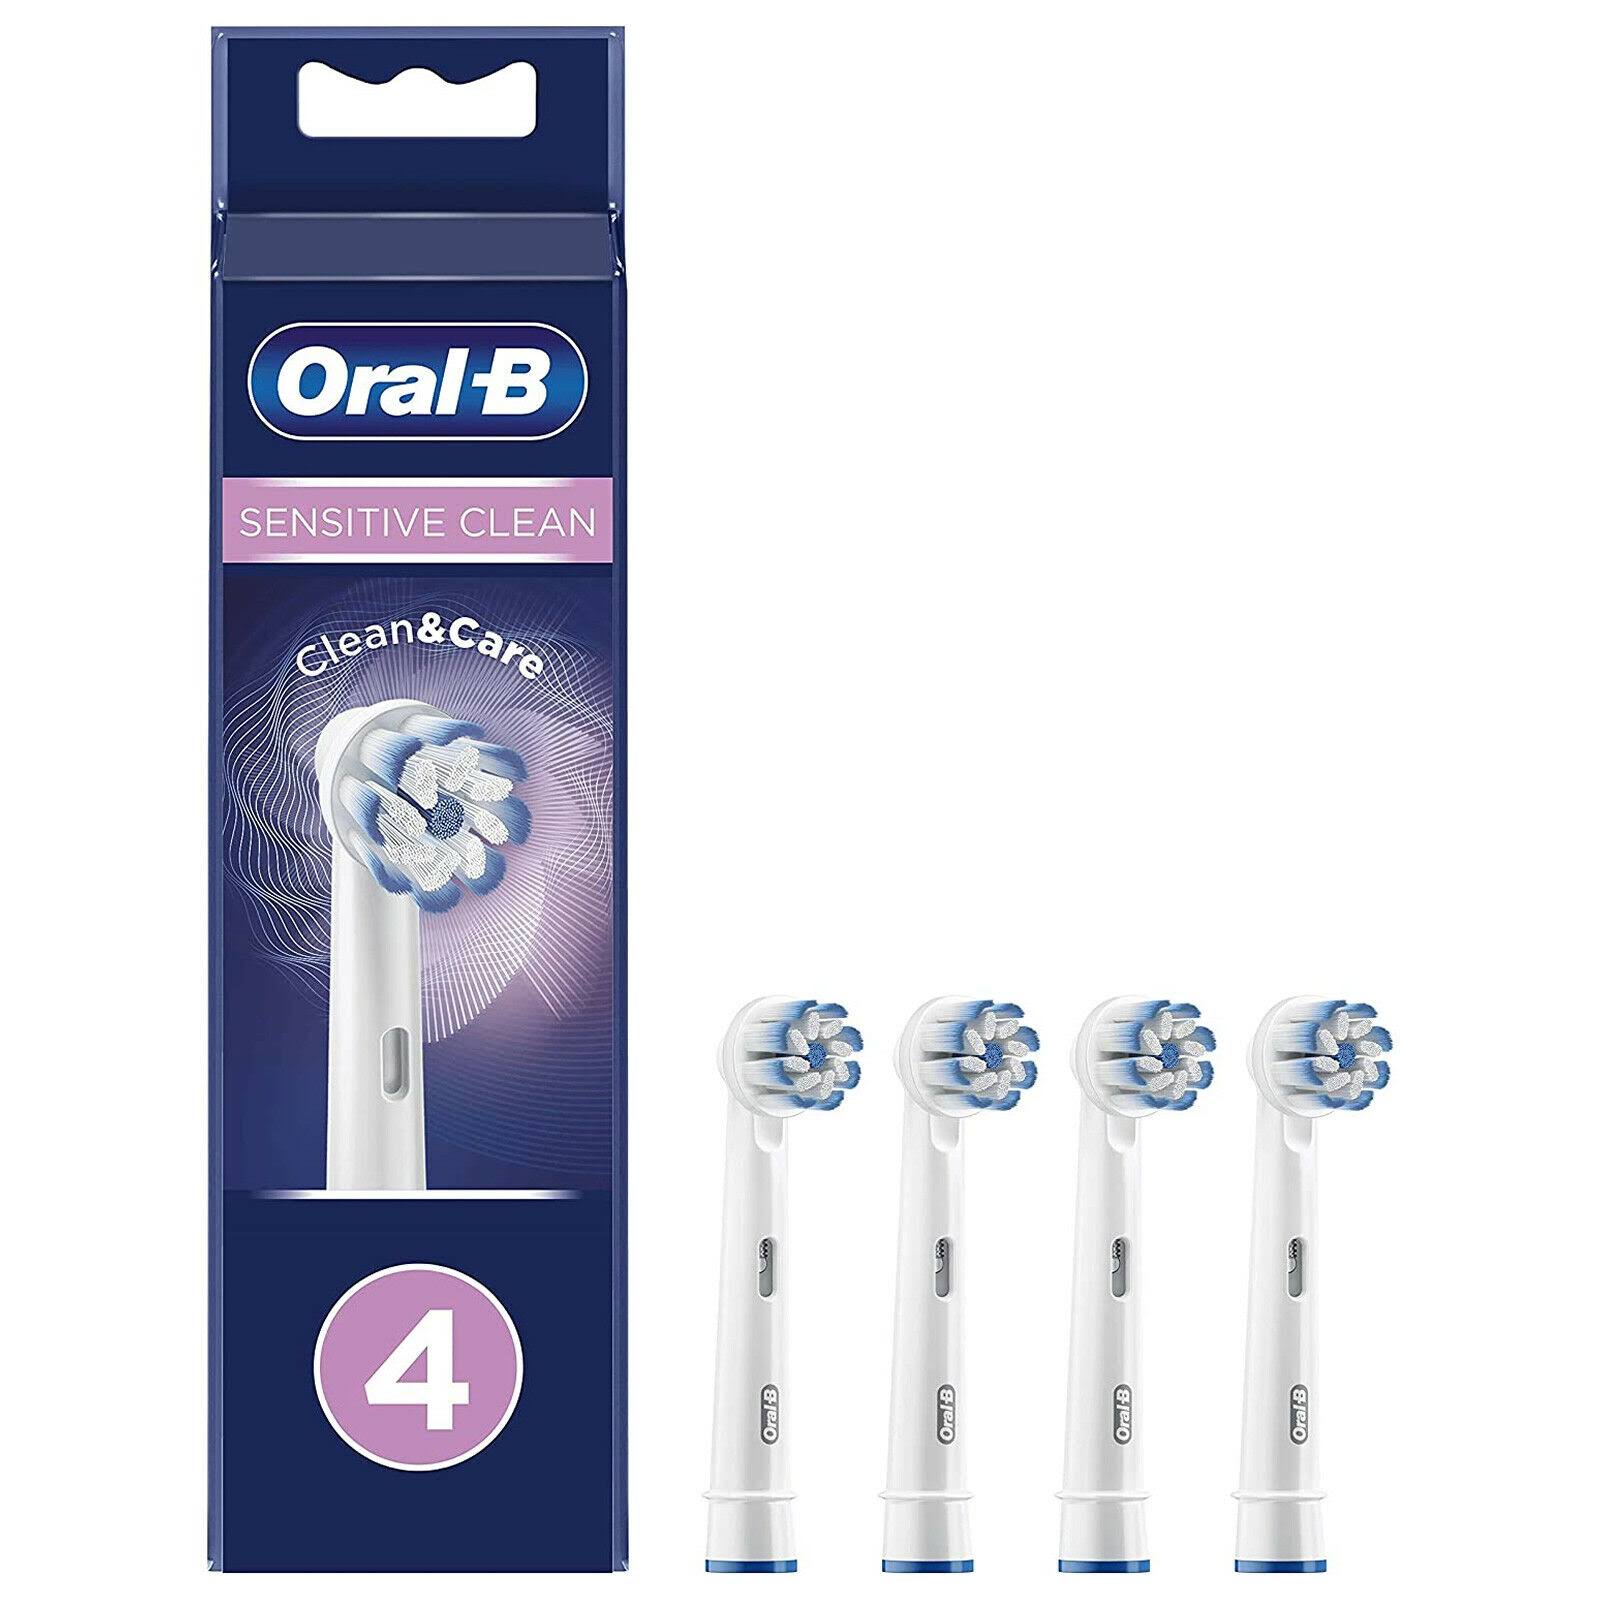 Oral-B Sensitive Clean Toothbrush Heads 4 Pack